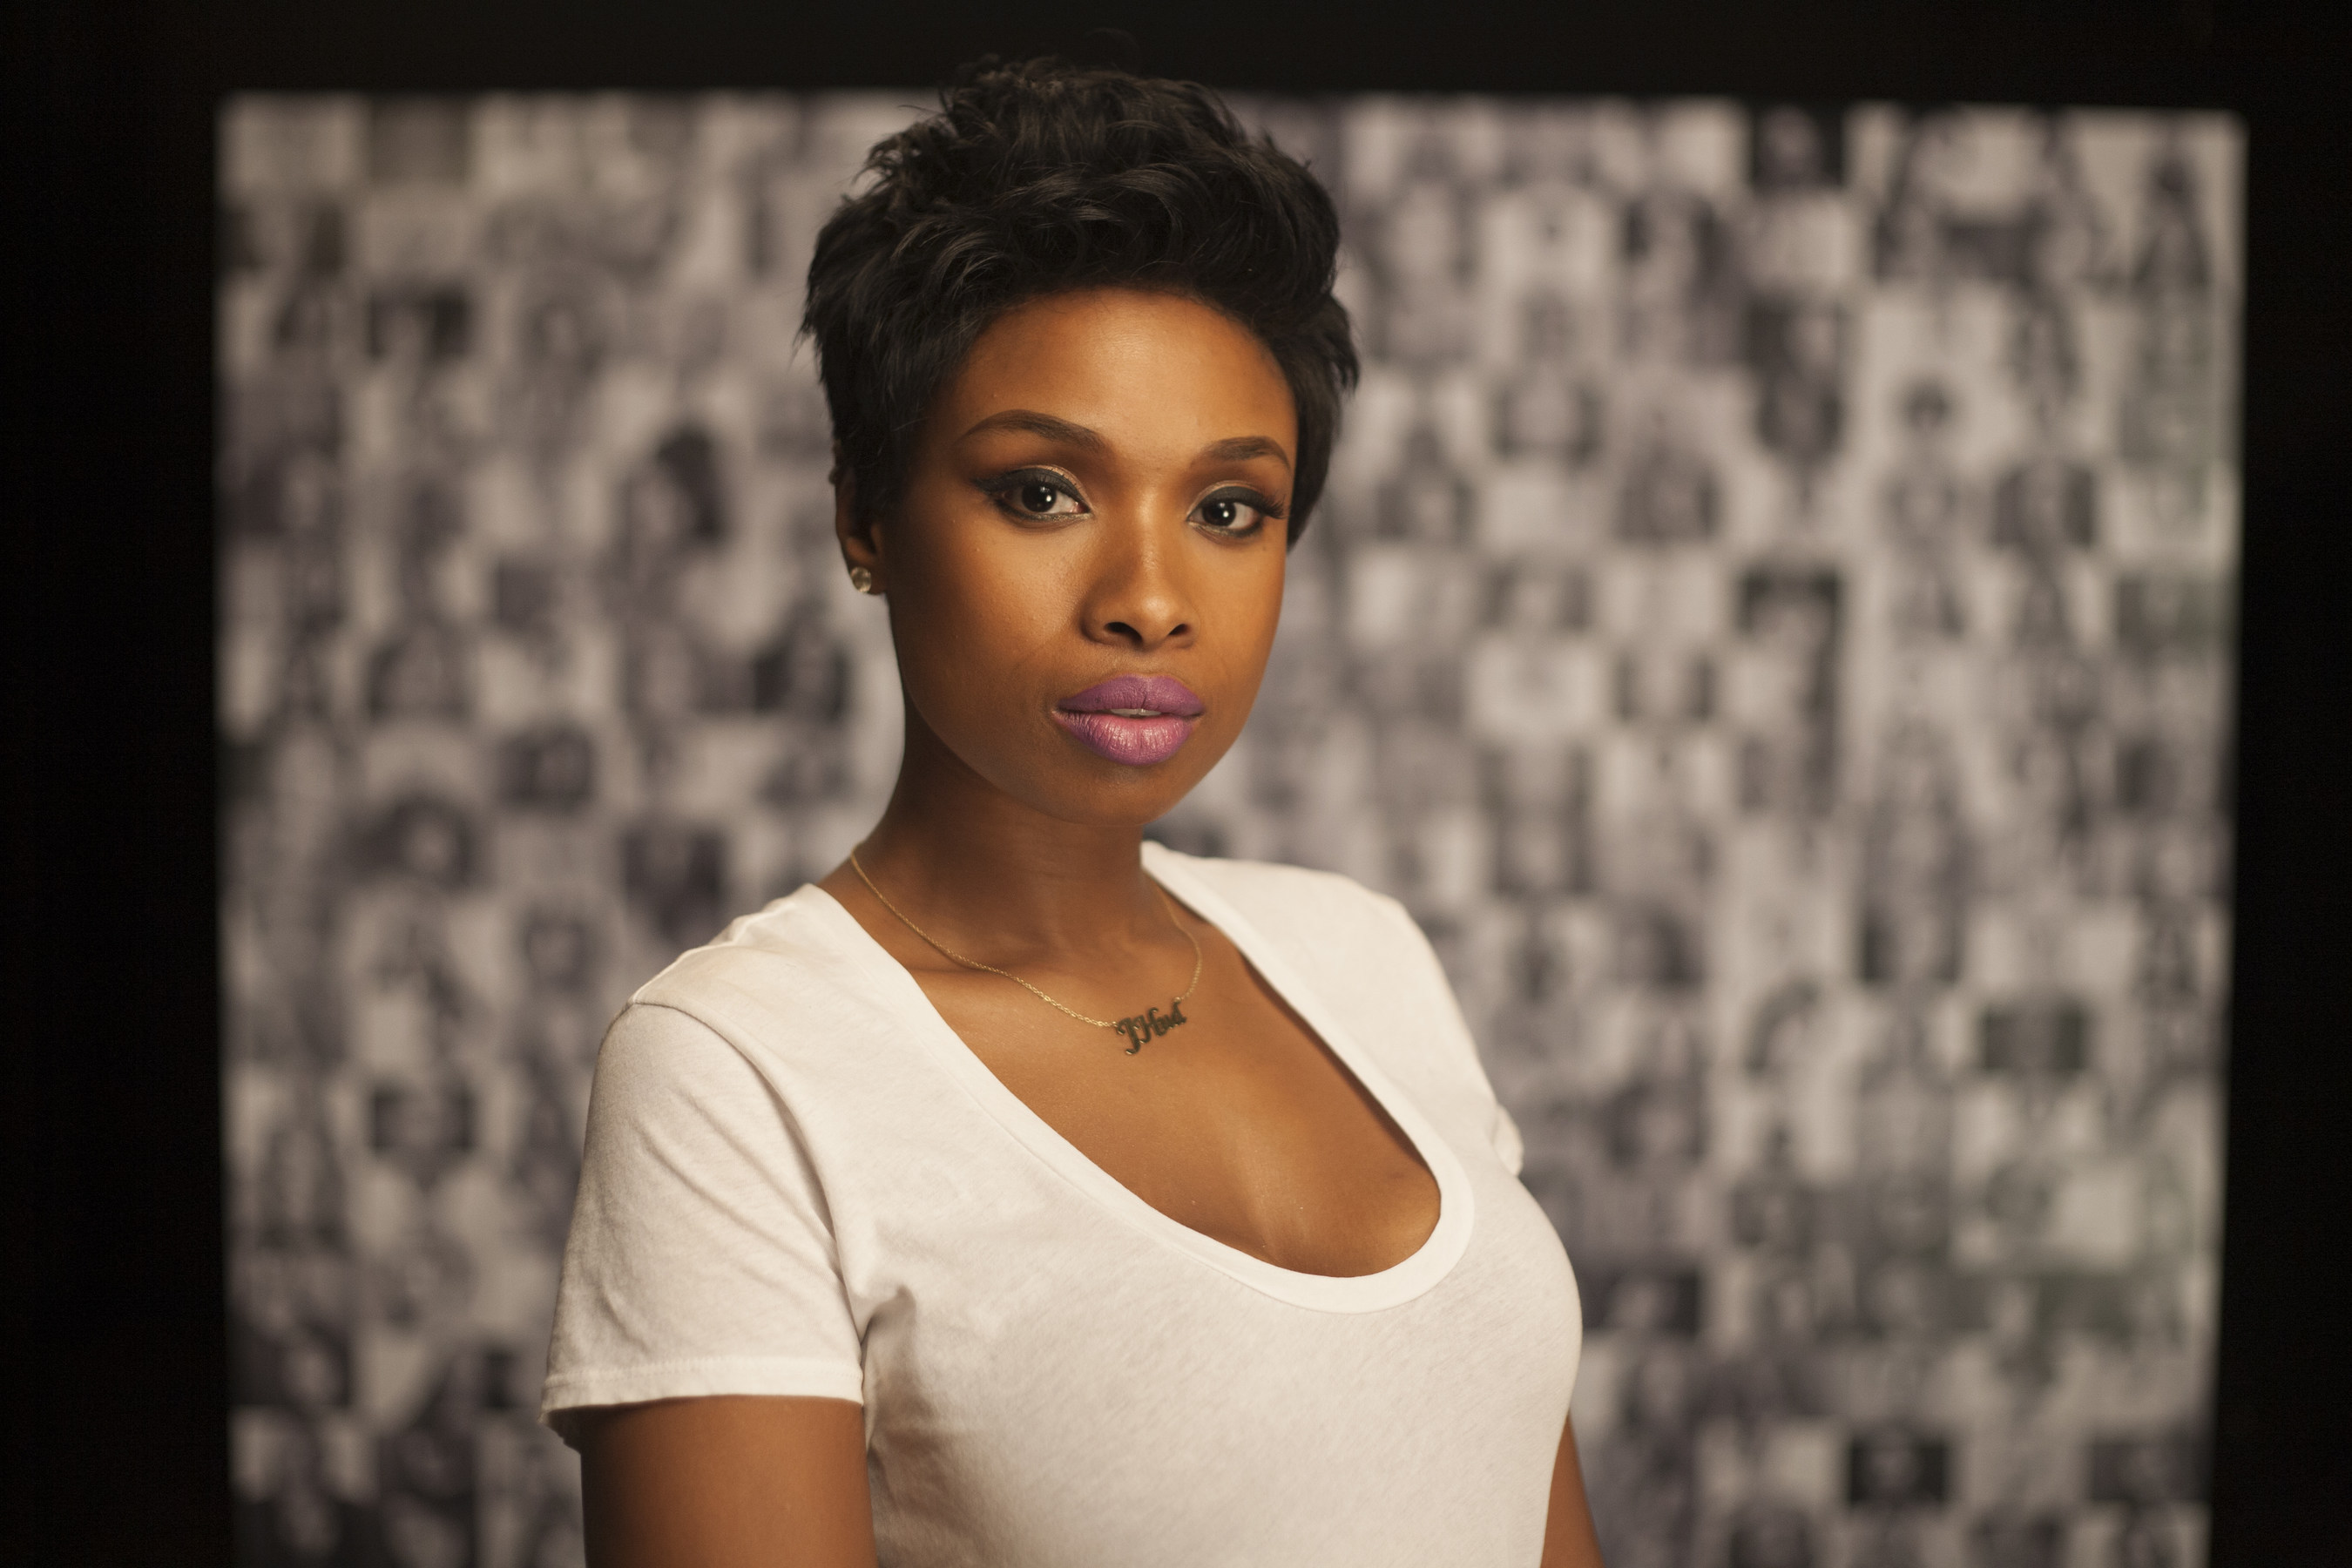 Jennifer Hudson joins the Women's Heart Alliance in a new PSA urging women to fight back against their number one killer - heart disease.